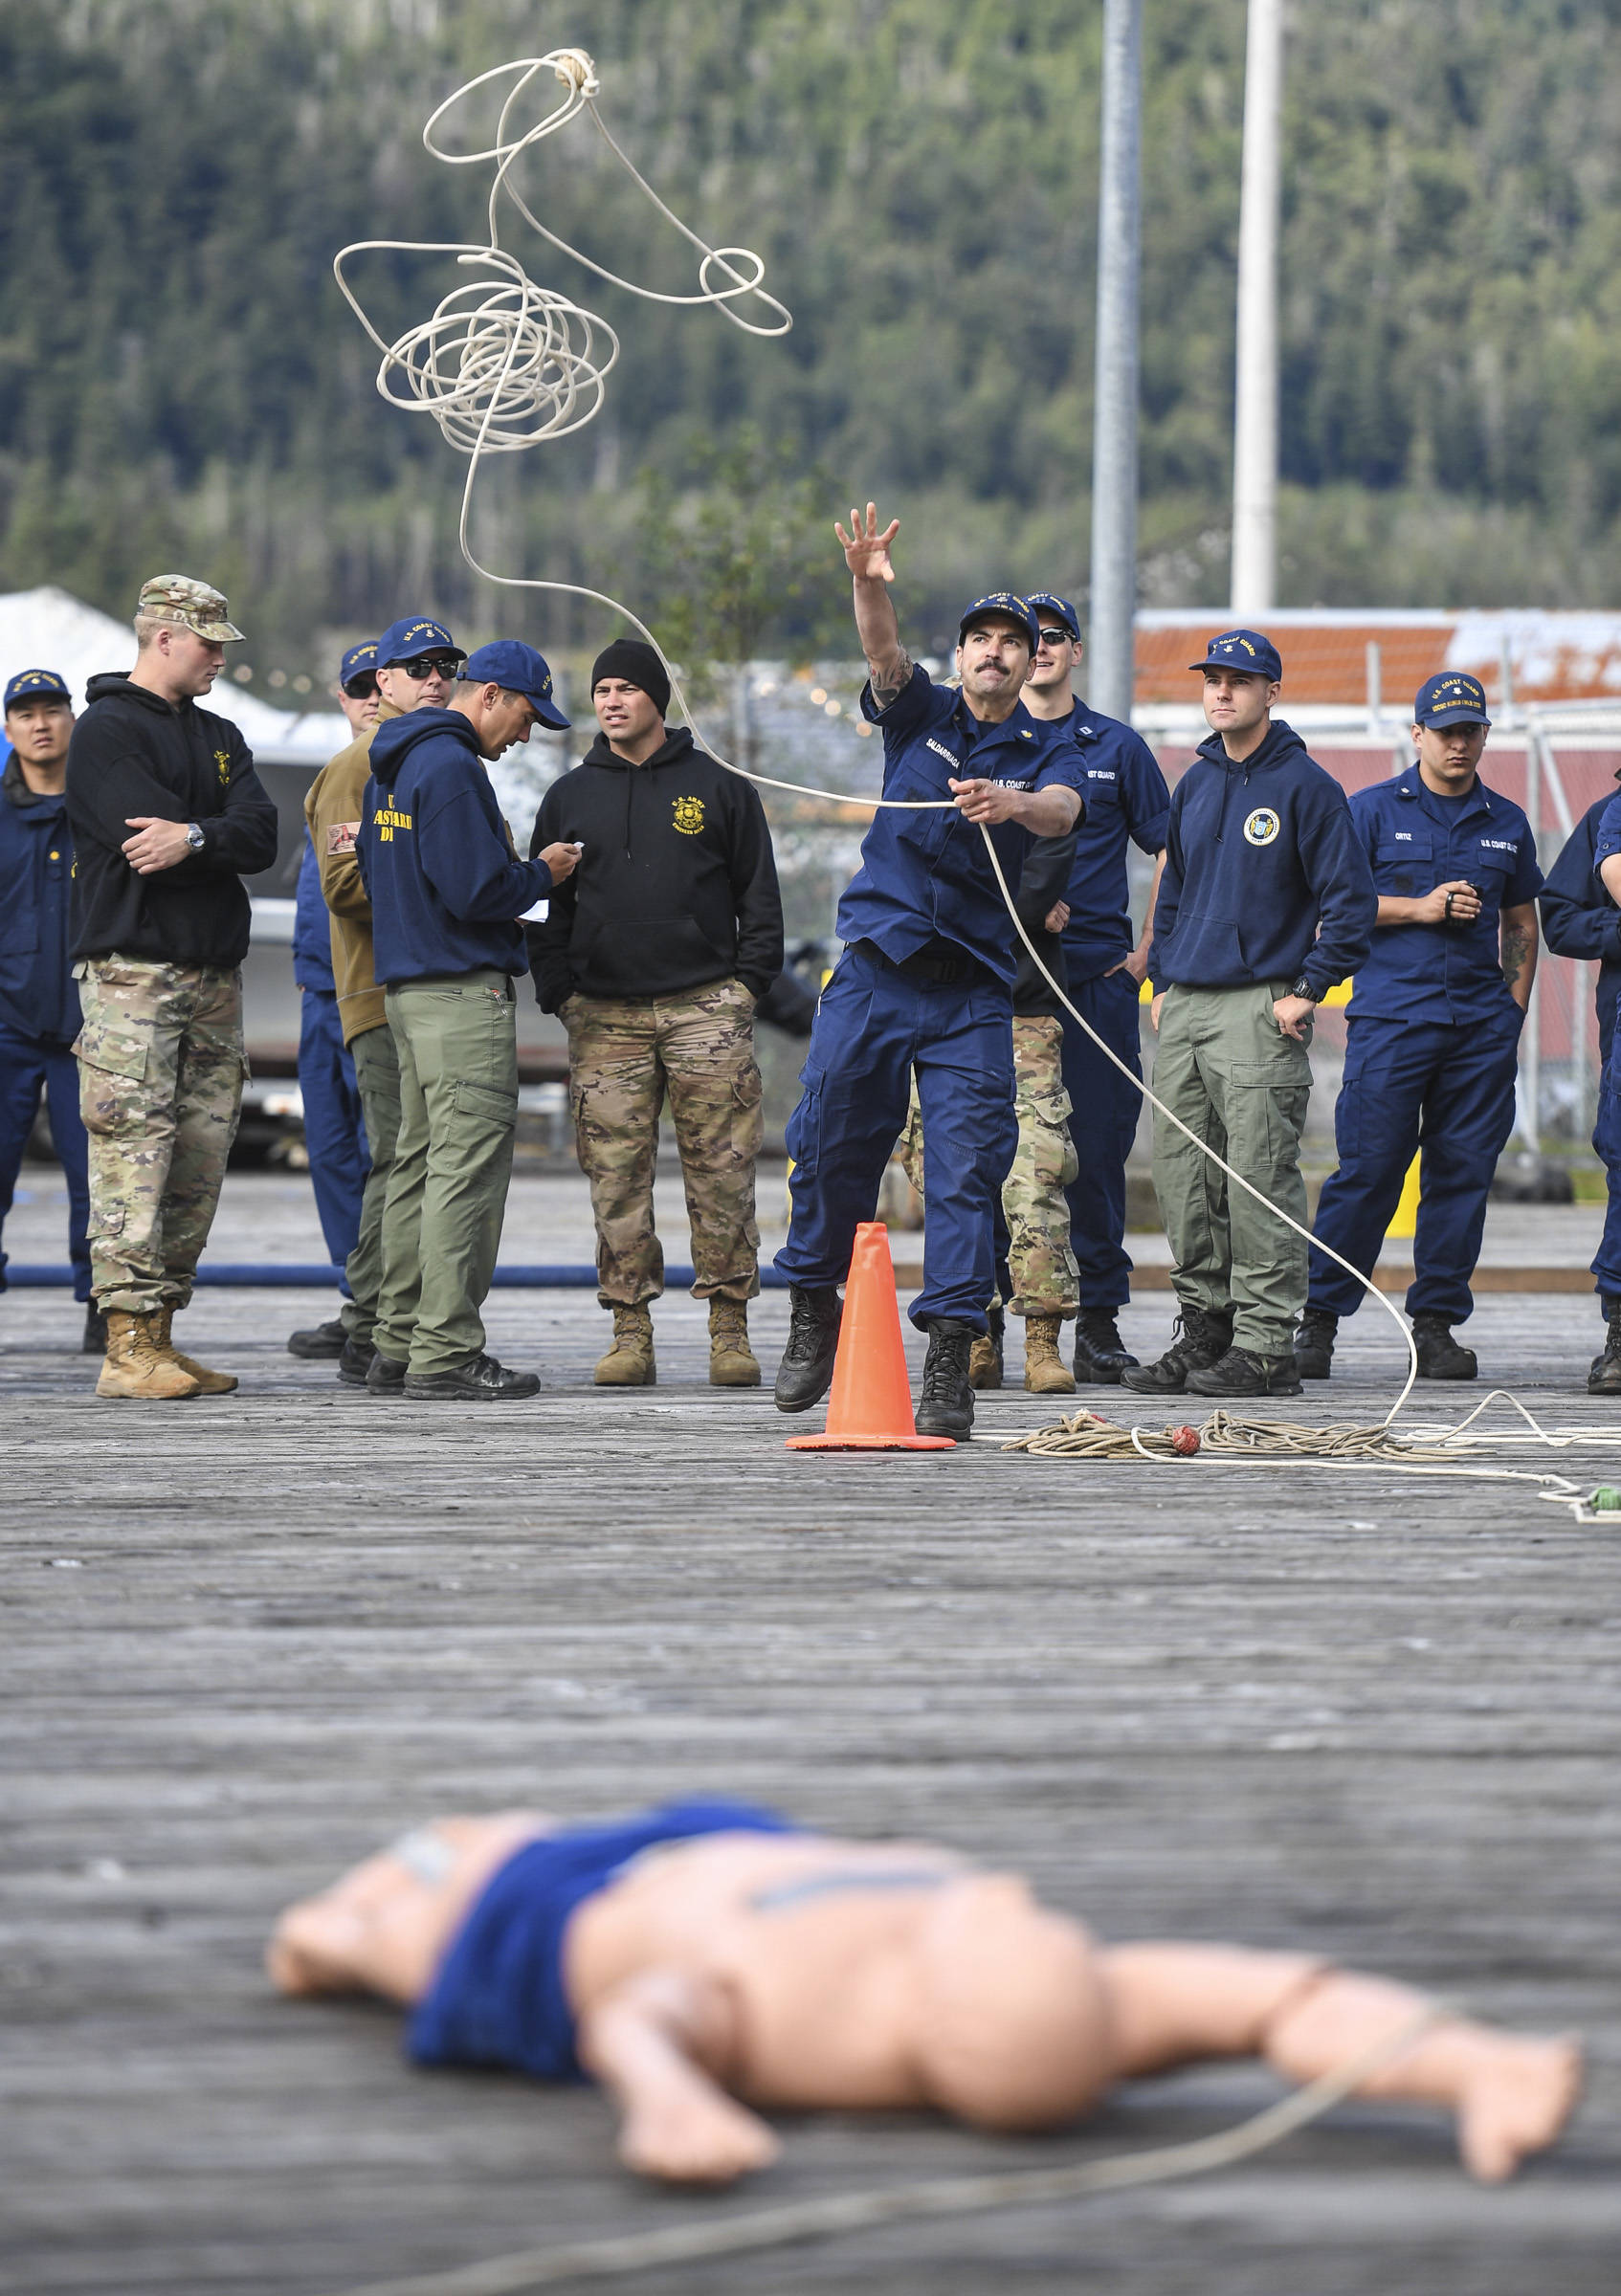 Marcos Saldarriaga, of the U.S. Coast Guard Cutter Kukui, competes in the rope throw during the annual Buoy Tender Olympics at Station Juneau on Wednesday, Aug. 21, 2019. (Michael Penn | Juneau Empire)